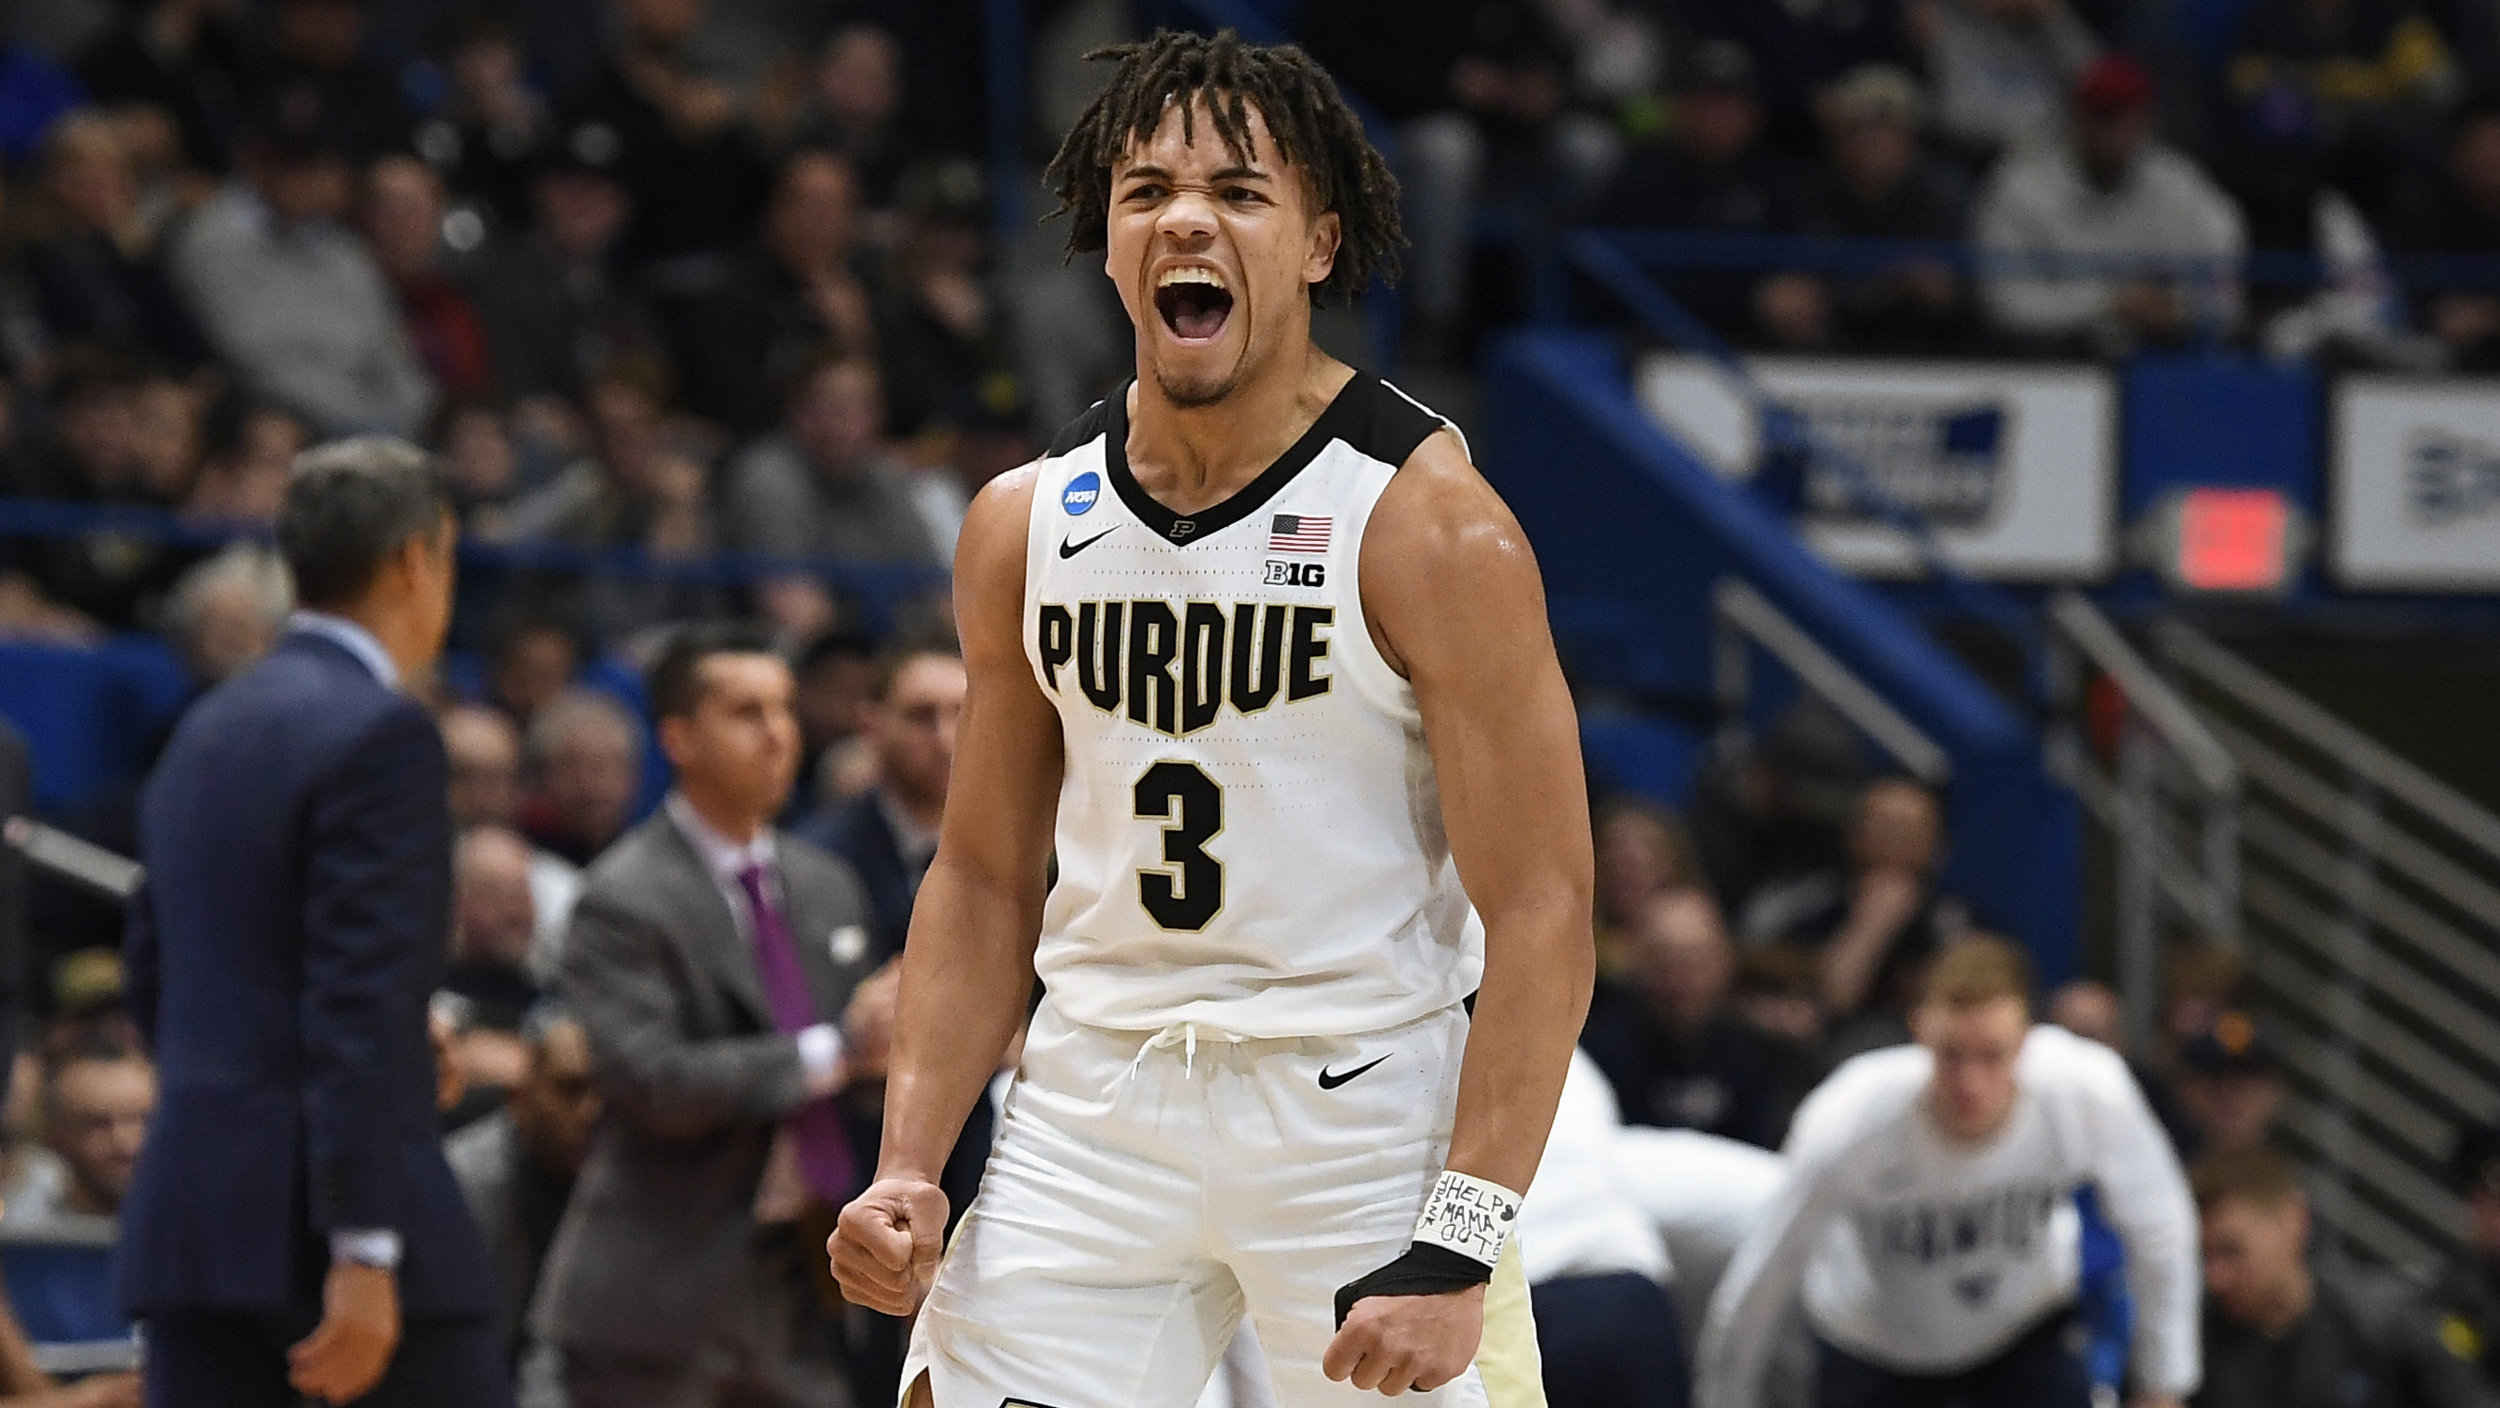 Purdue Basketball: What Does Carsen Edwards and Nojel Eastern's